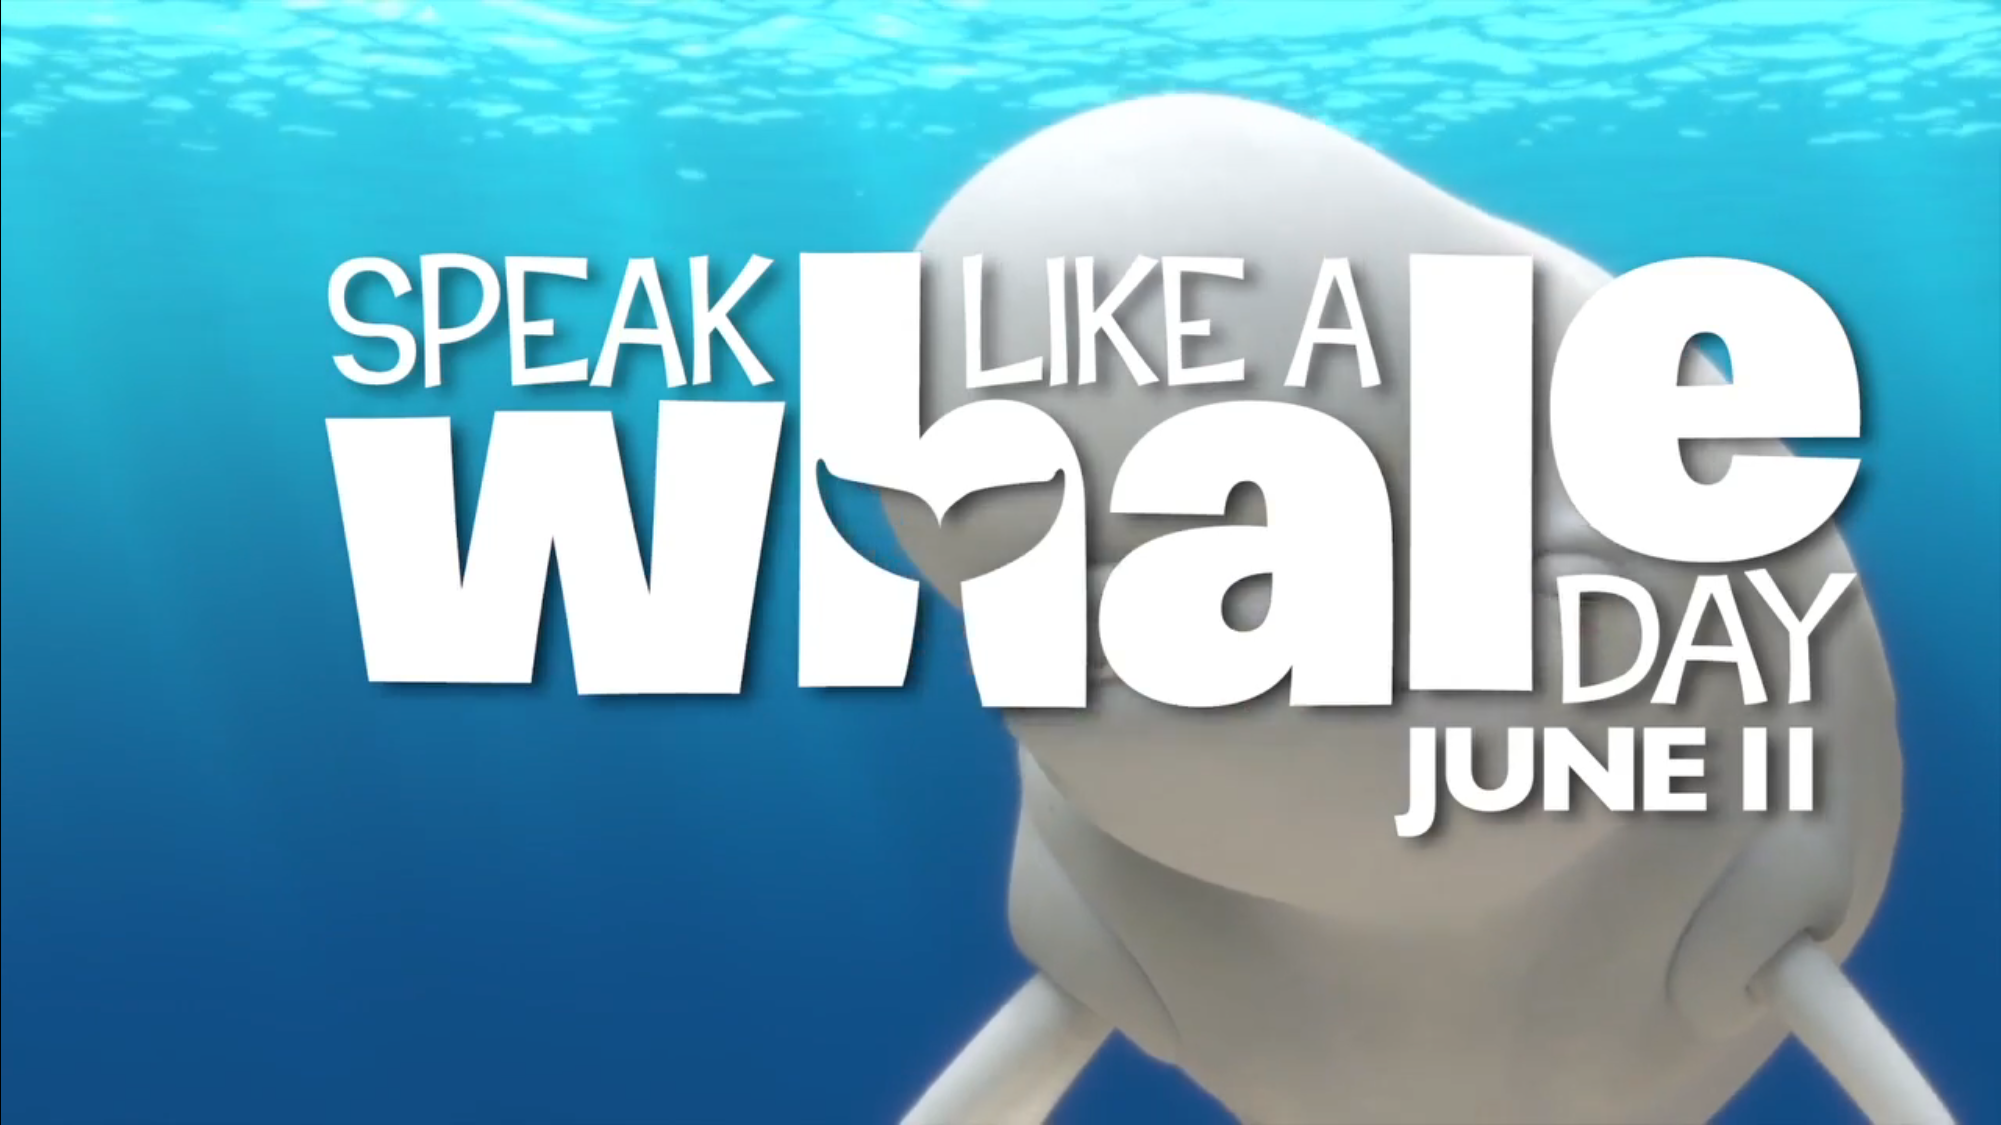 How Fans Can Take Part in Finding Dory’s #SpeakLikeAWhaleDay